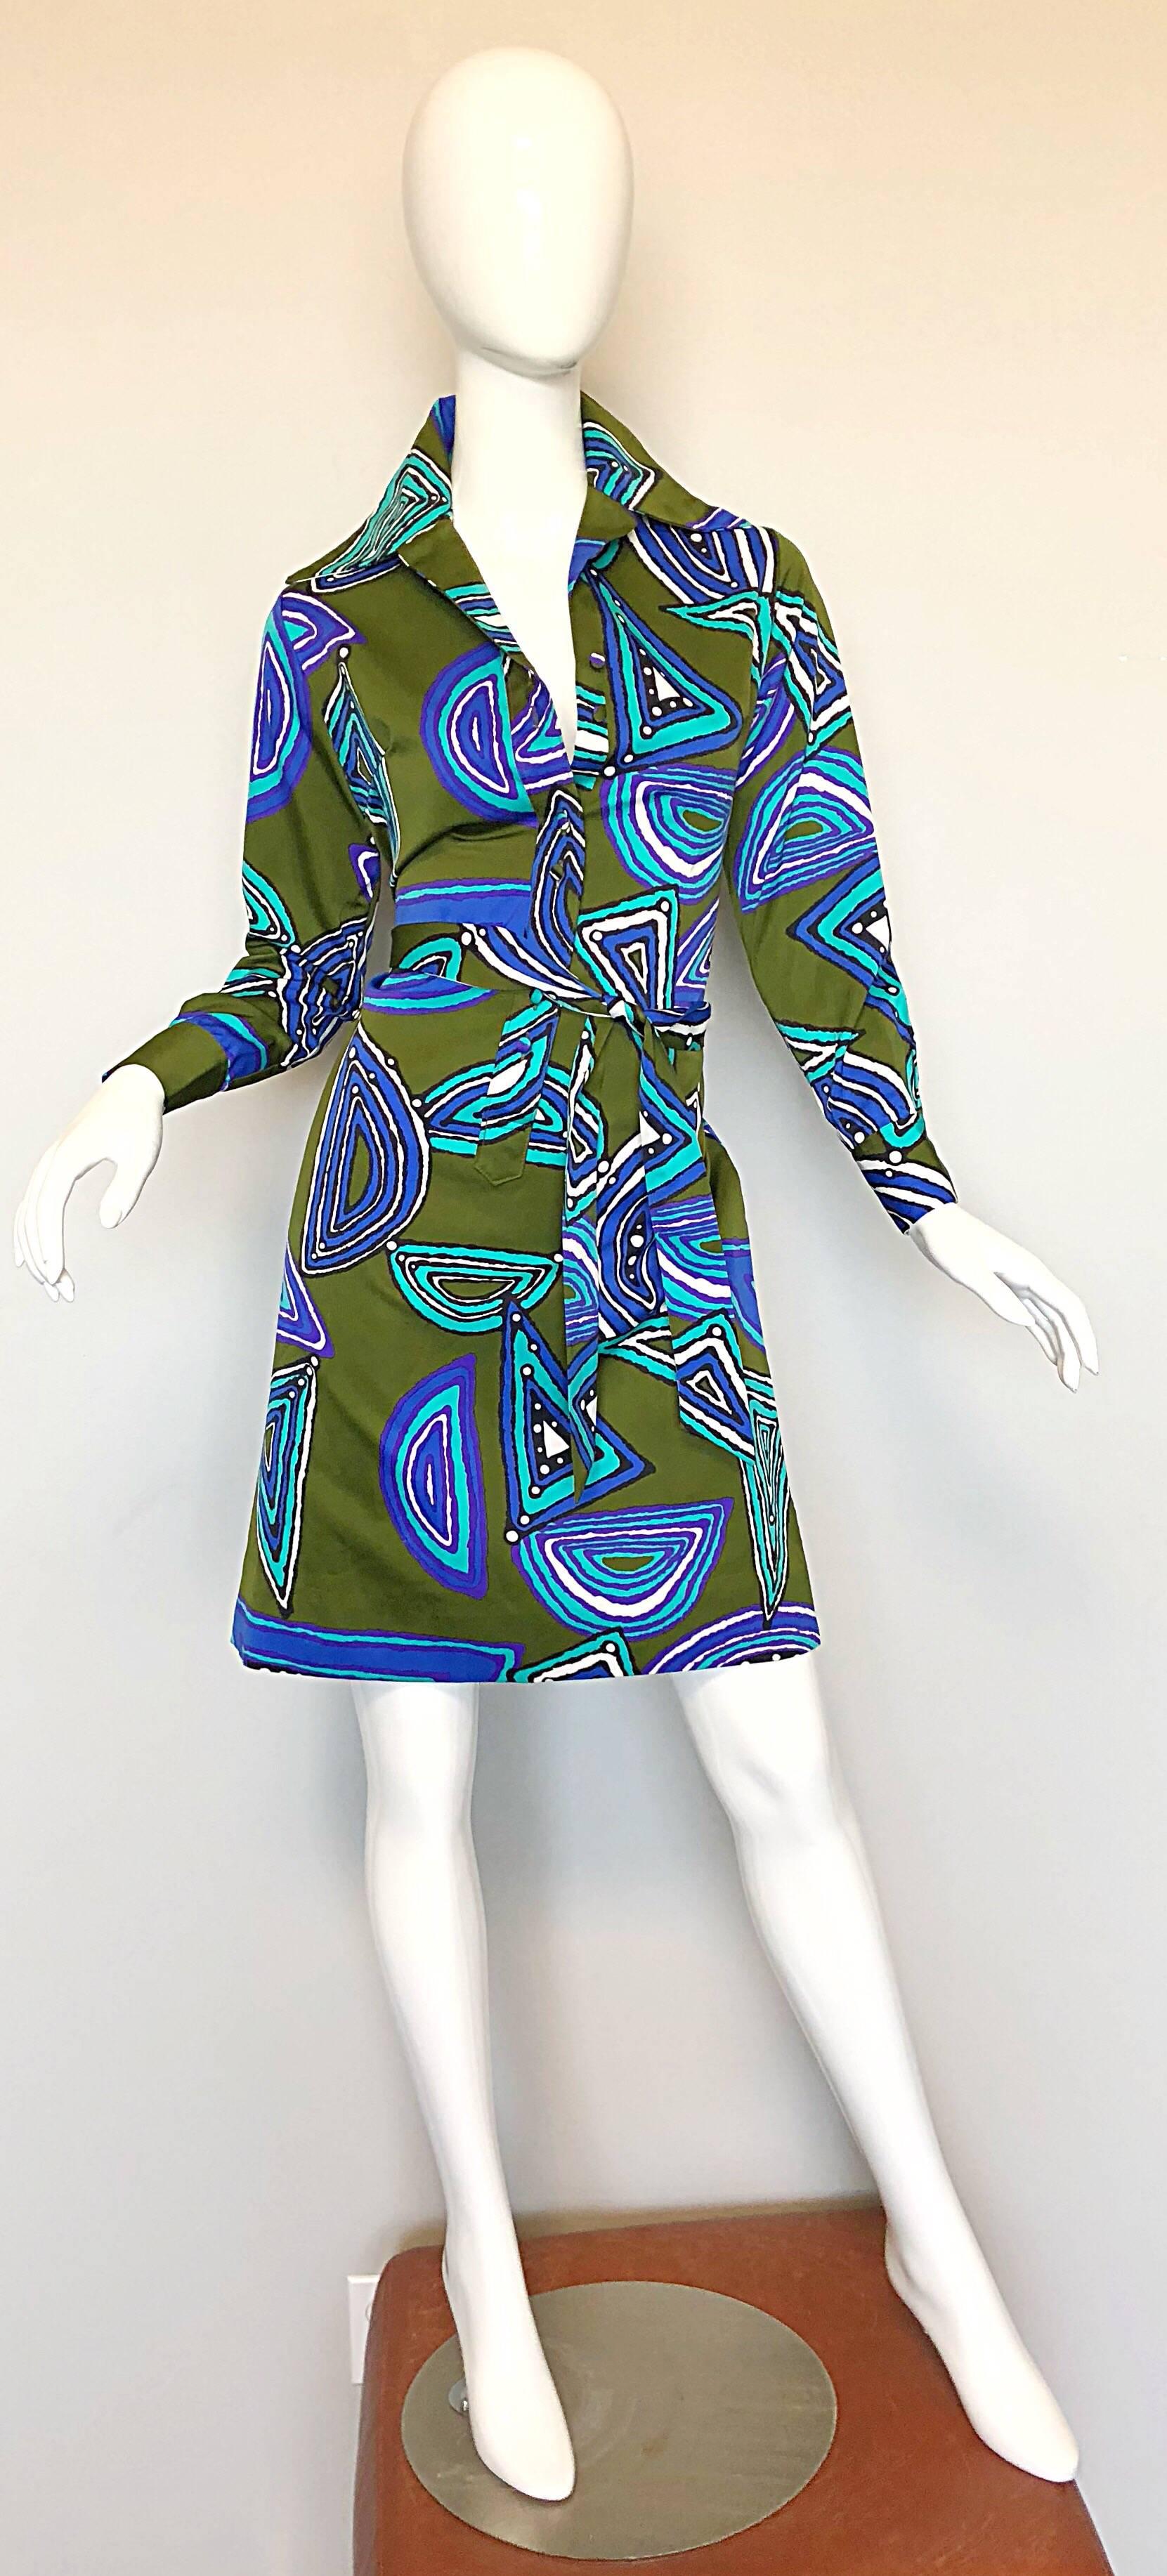 Chic vintage JEANNE LANVIN 1970s olive green and blue long sleeve belted shirt dress! Features an olive green background with abstract prints in vibrant hues of blue, turquoise teal and white. Fabric covered buttons up the front, and at each sleeve